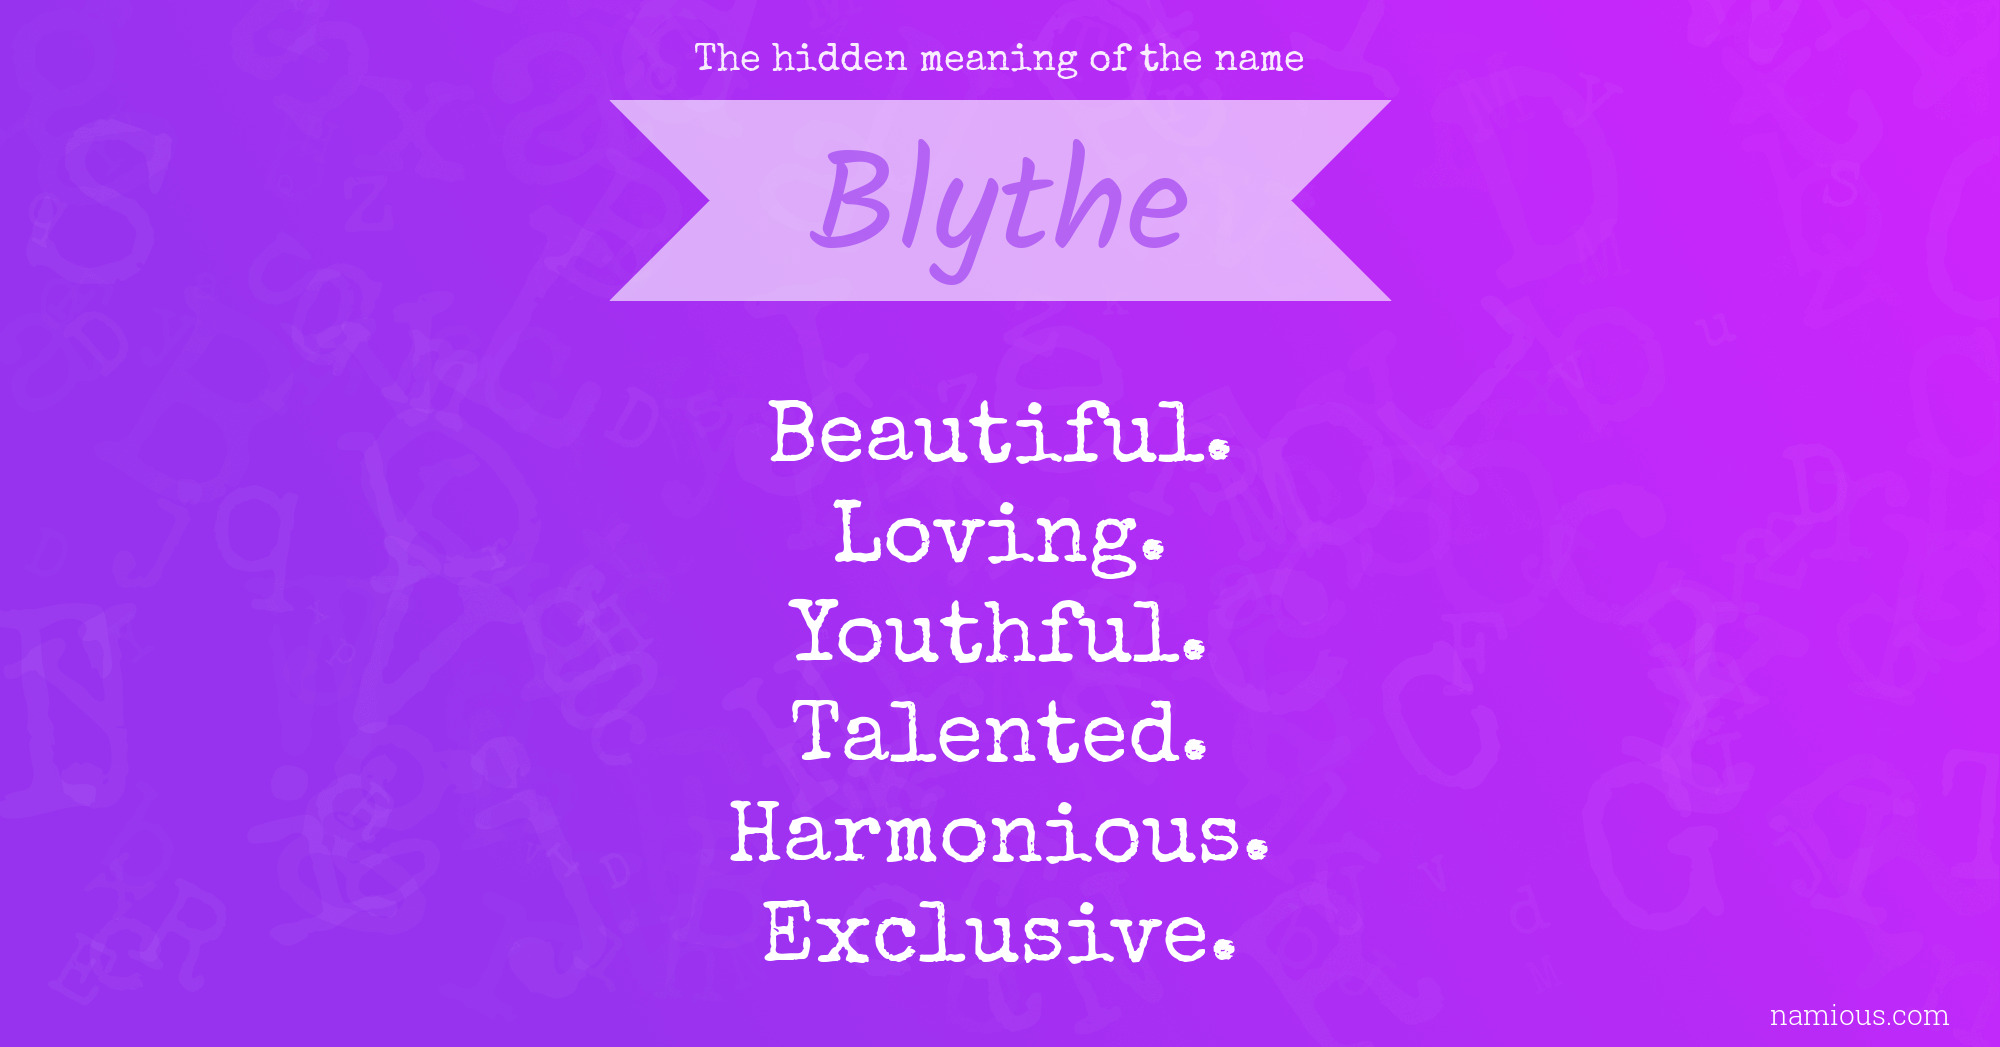 The hidden meaning of the name Blythe